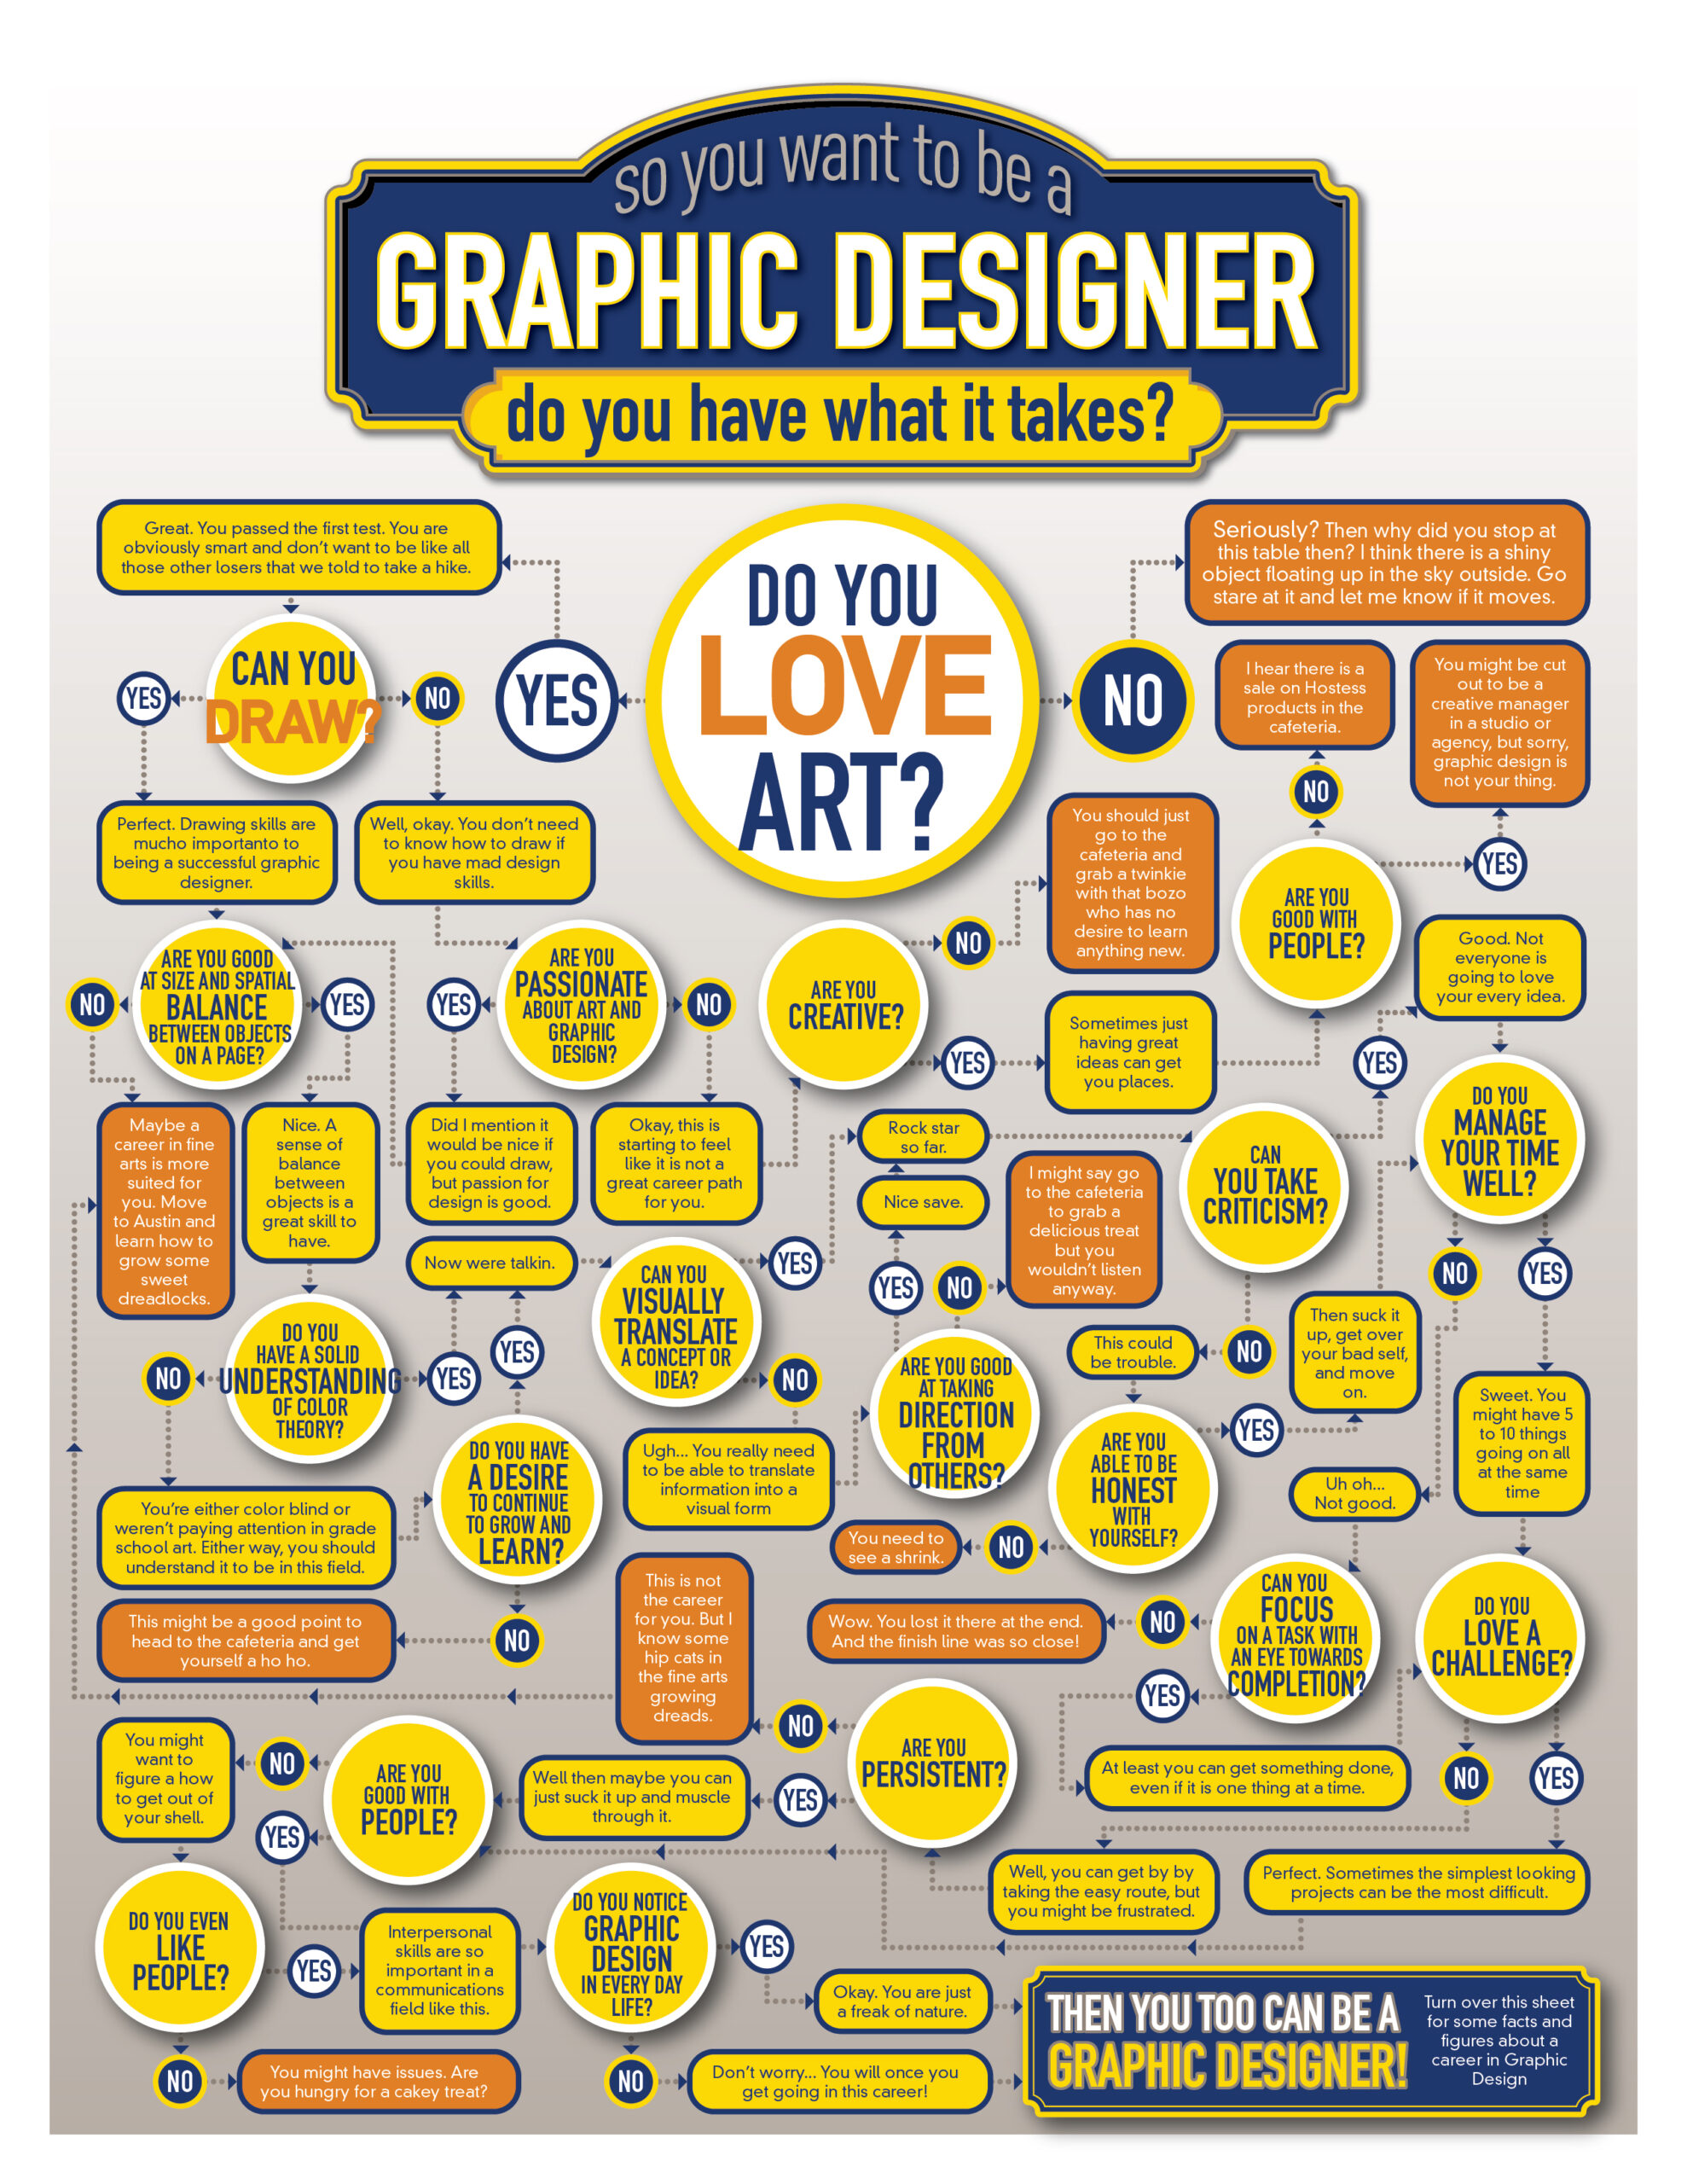 9 Infographic Design Tips from Top Design Sites and Experts